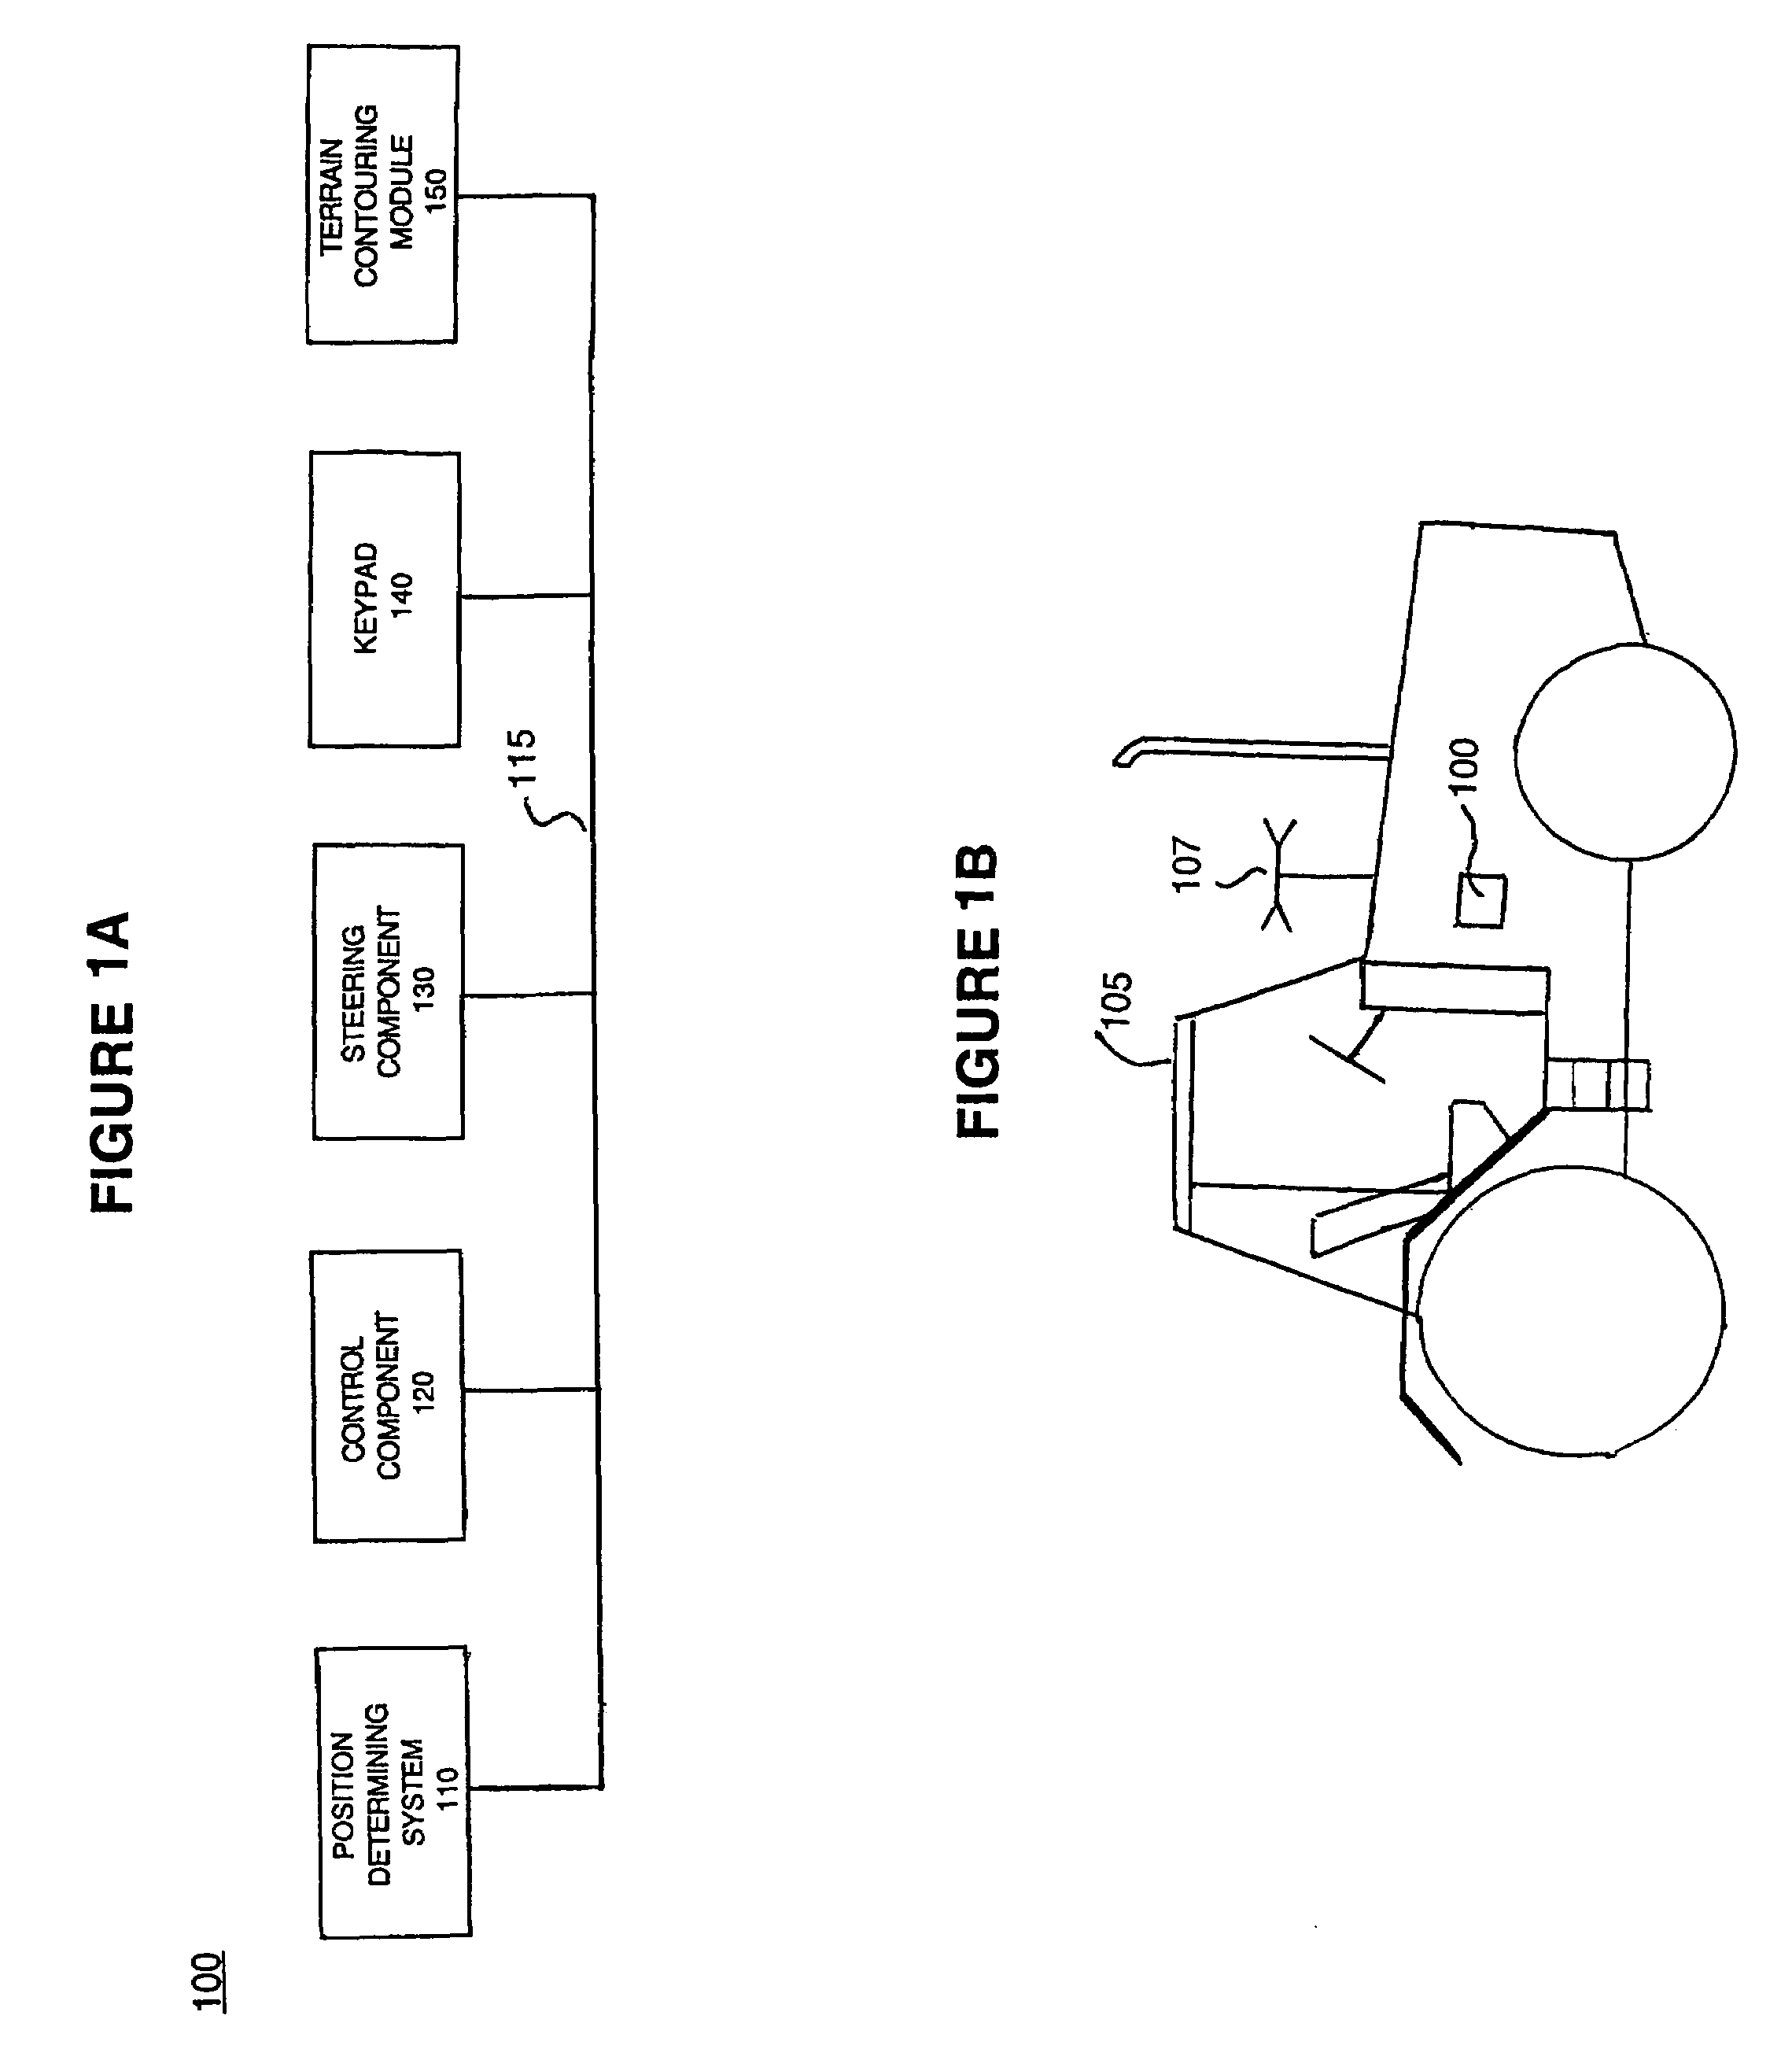 Method and system for controlling steering deadband in a mobile machine